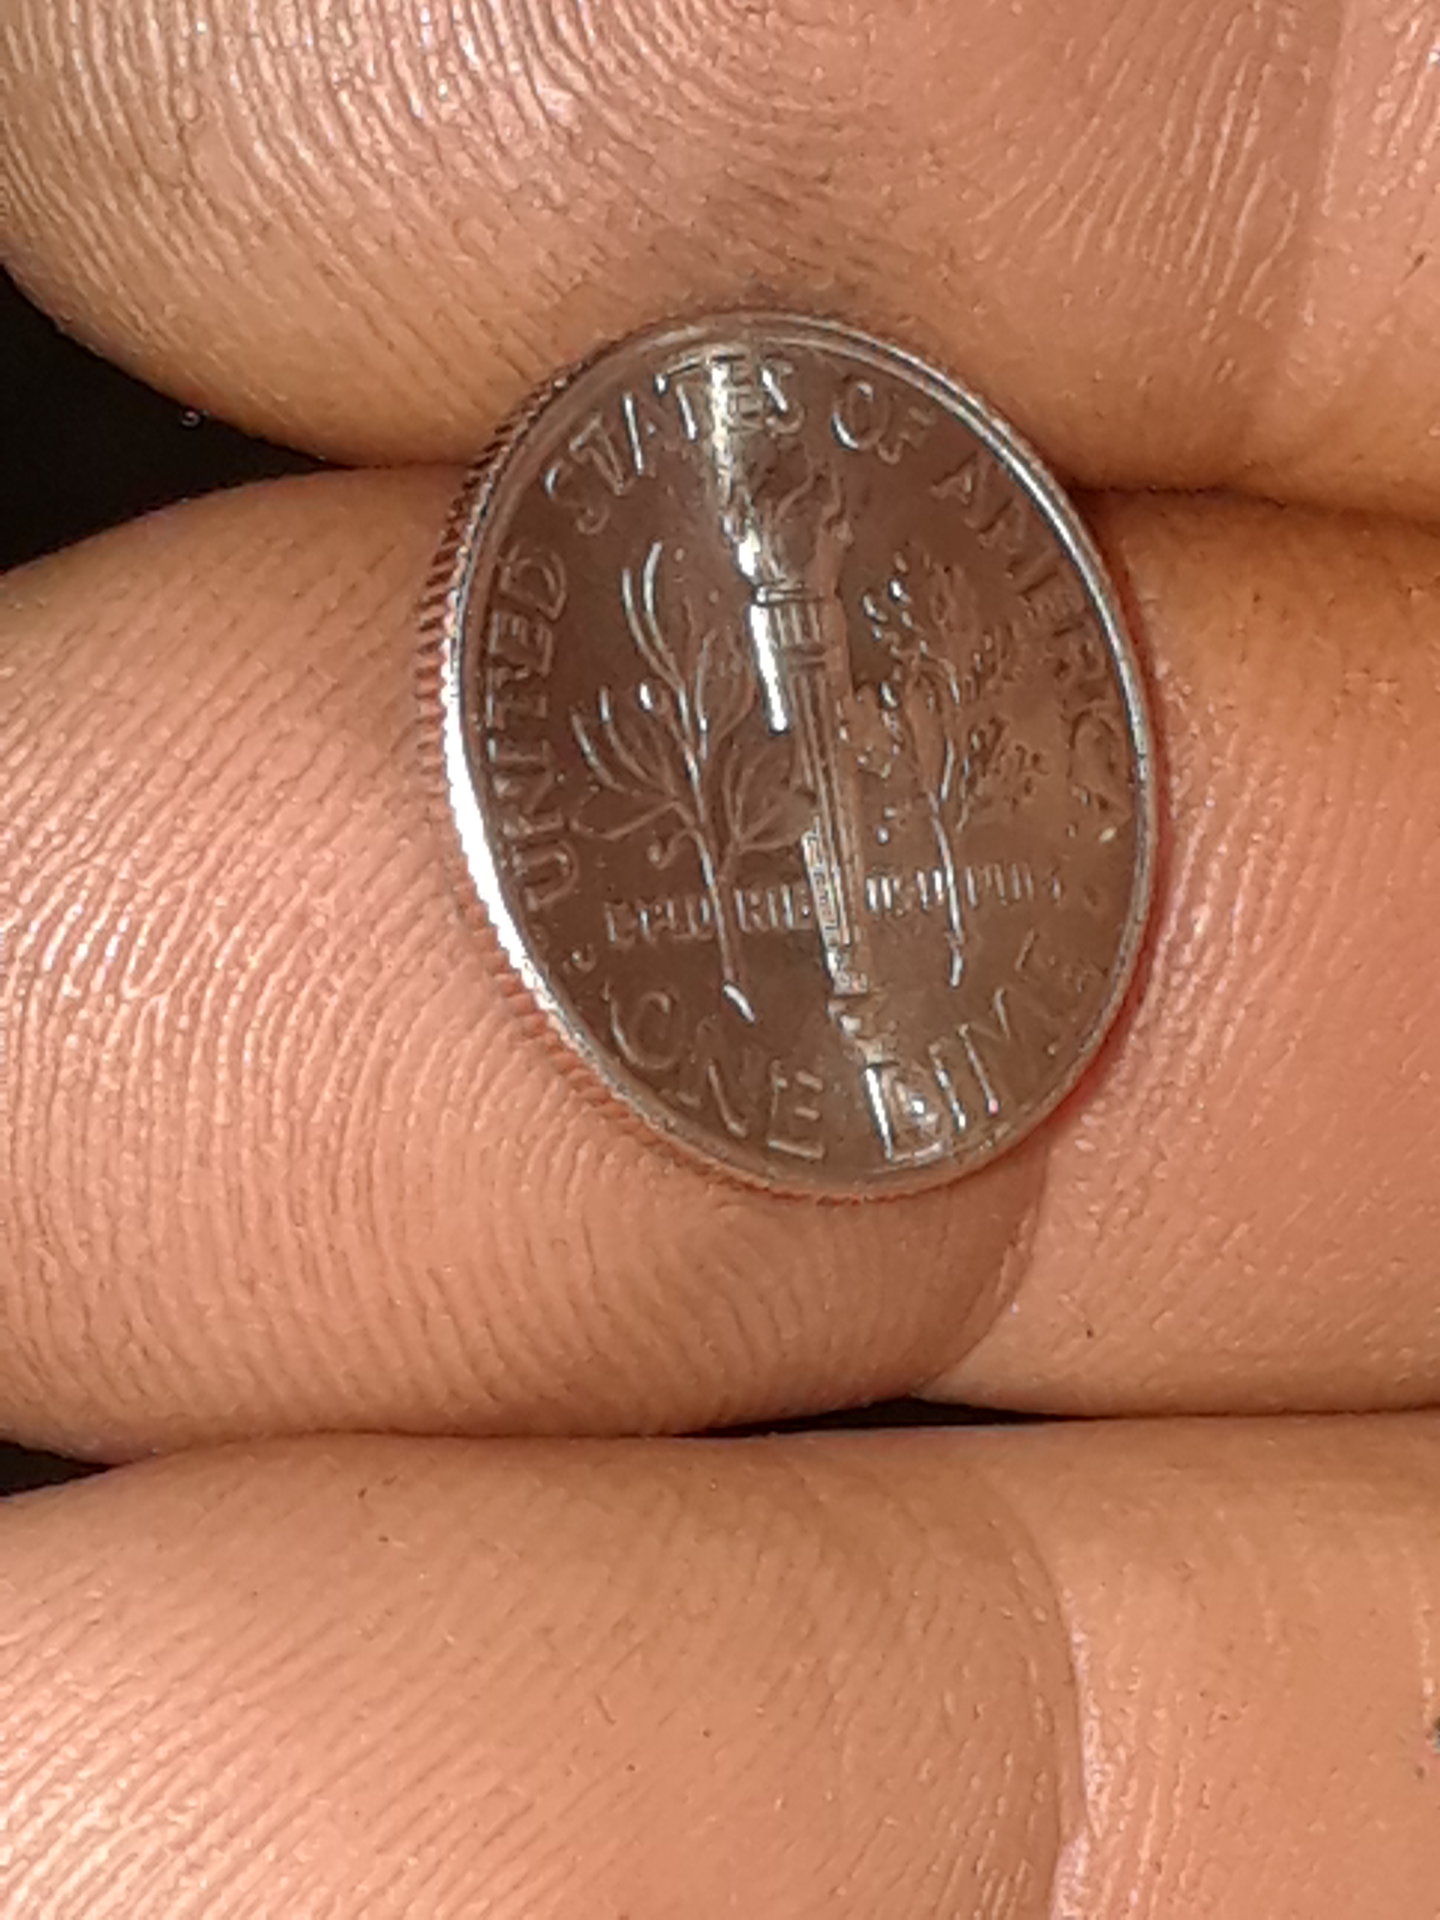 I see this often on dimes..what is it? | Coin Talk